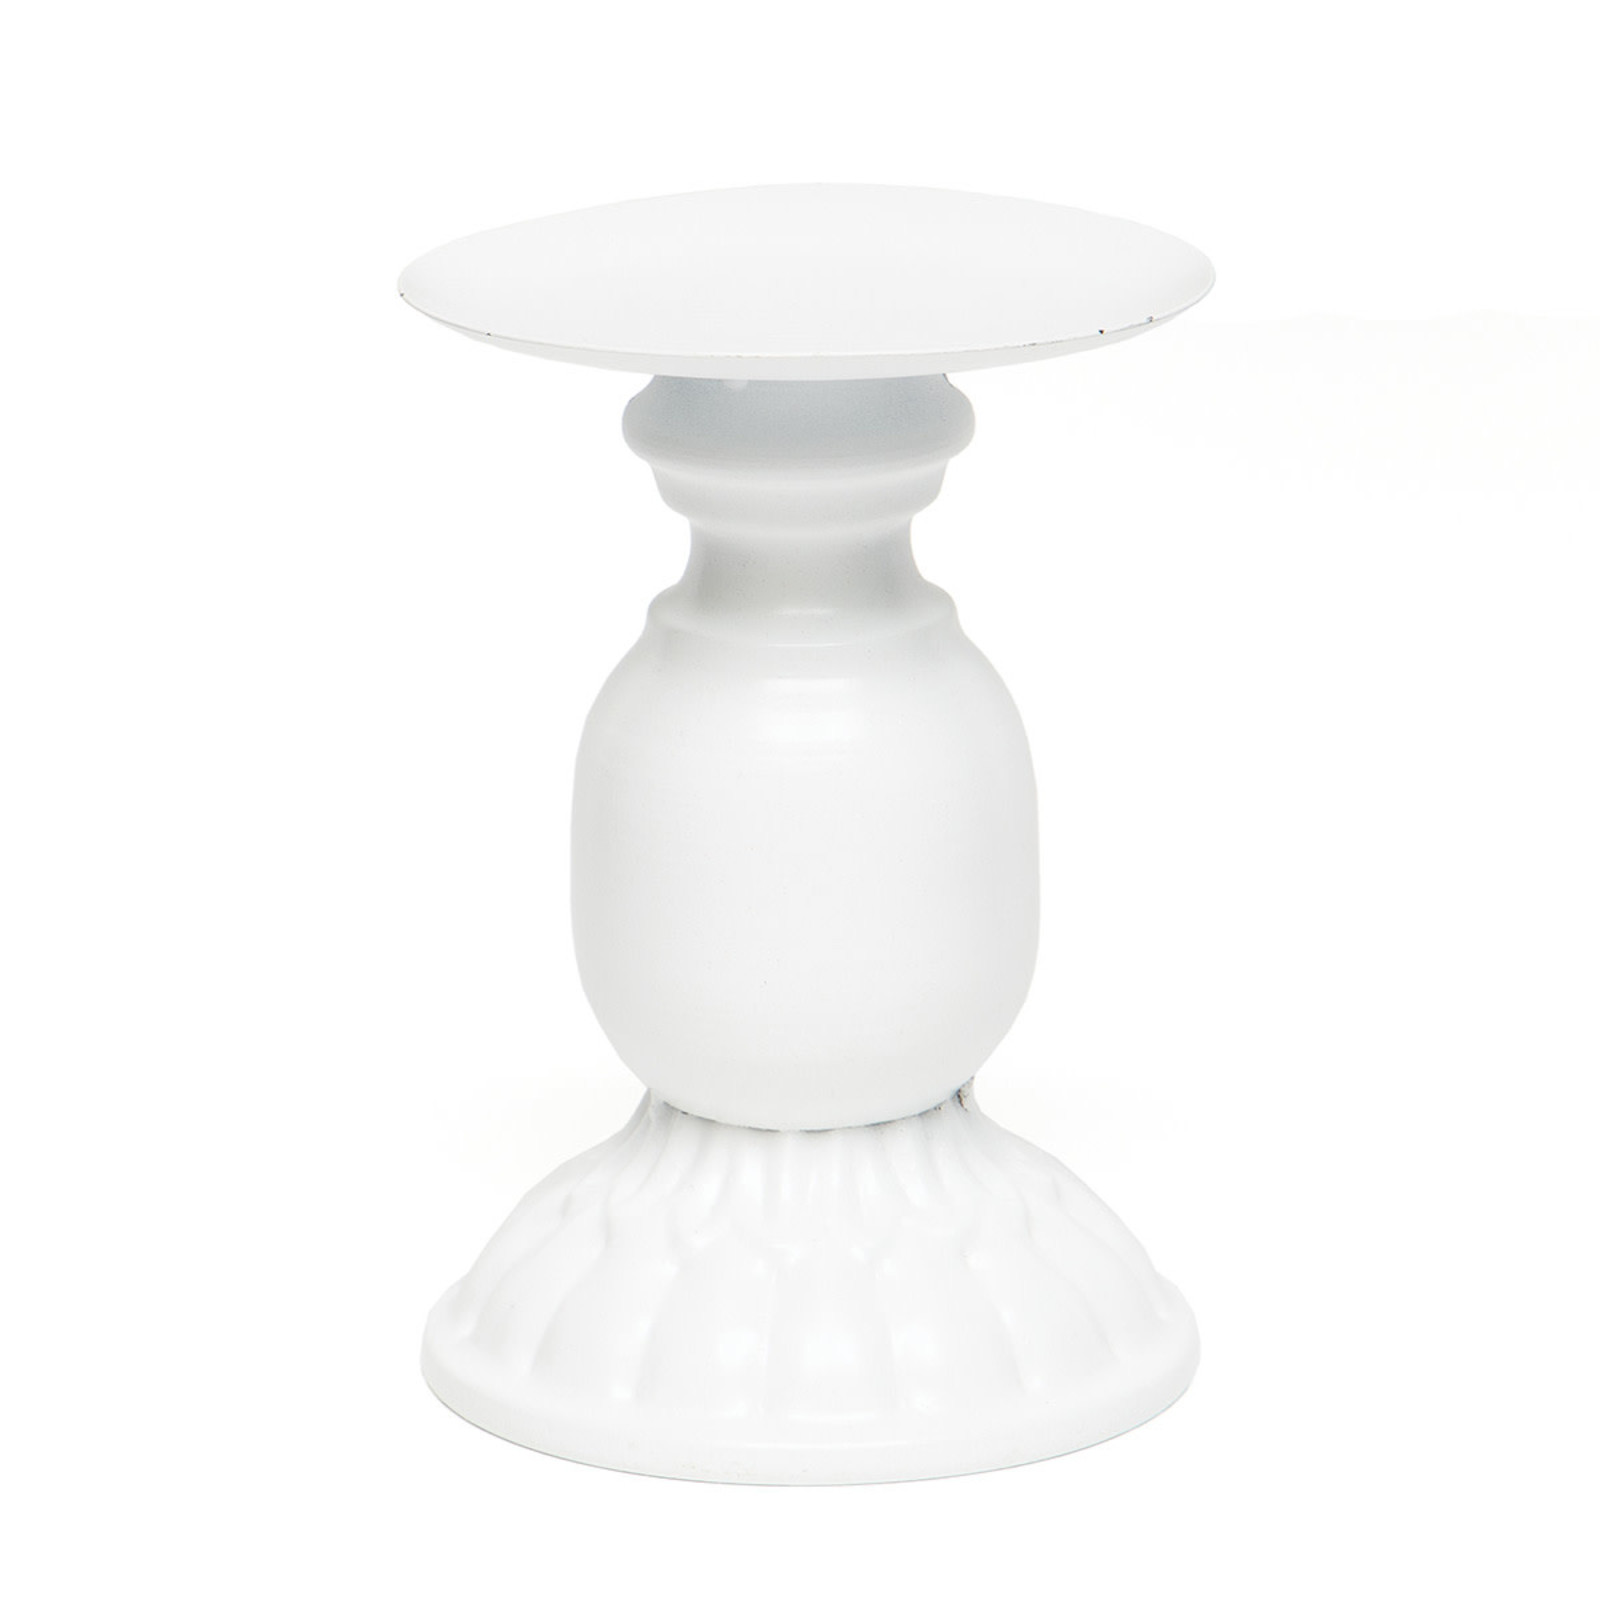 Meravic METAL CANDLEHOLDER MATTE WHITE Small A2821 loading=